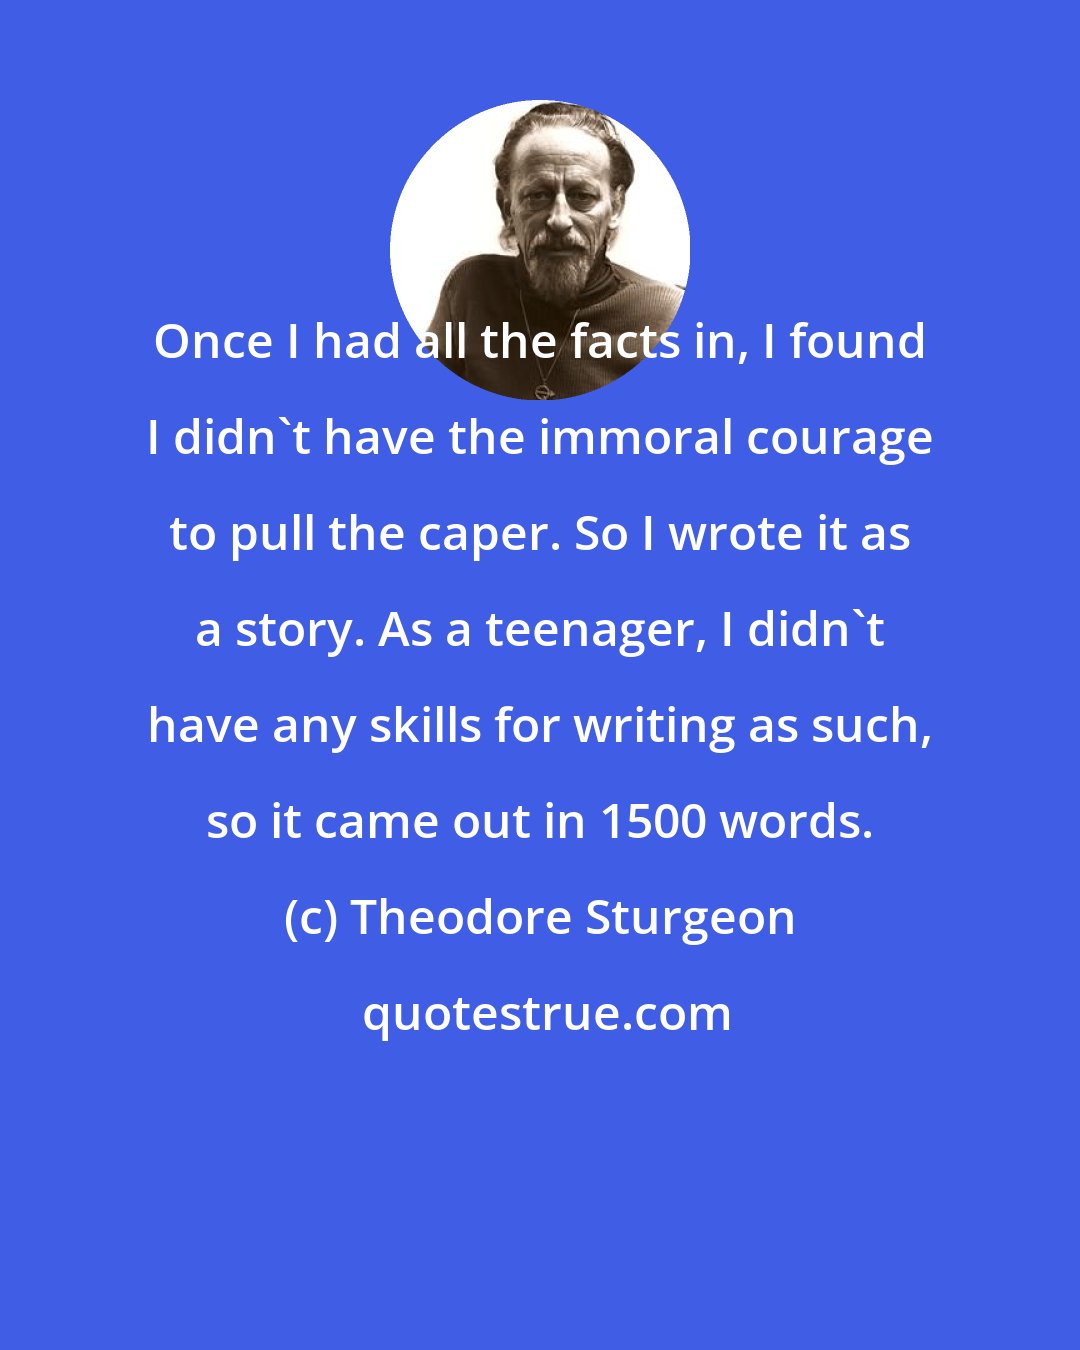 Theodore Sturgeon: Once I had all the facts in, I found I didn't have the immoral courage to pull the caper. So I wrote it as a story. As a teenager, I didn't have any skills for writing as such, so it came out in 1500 words.